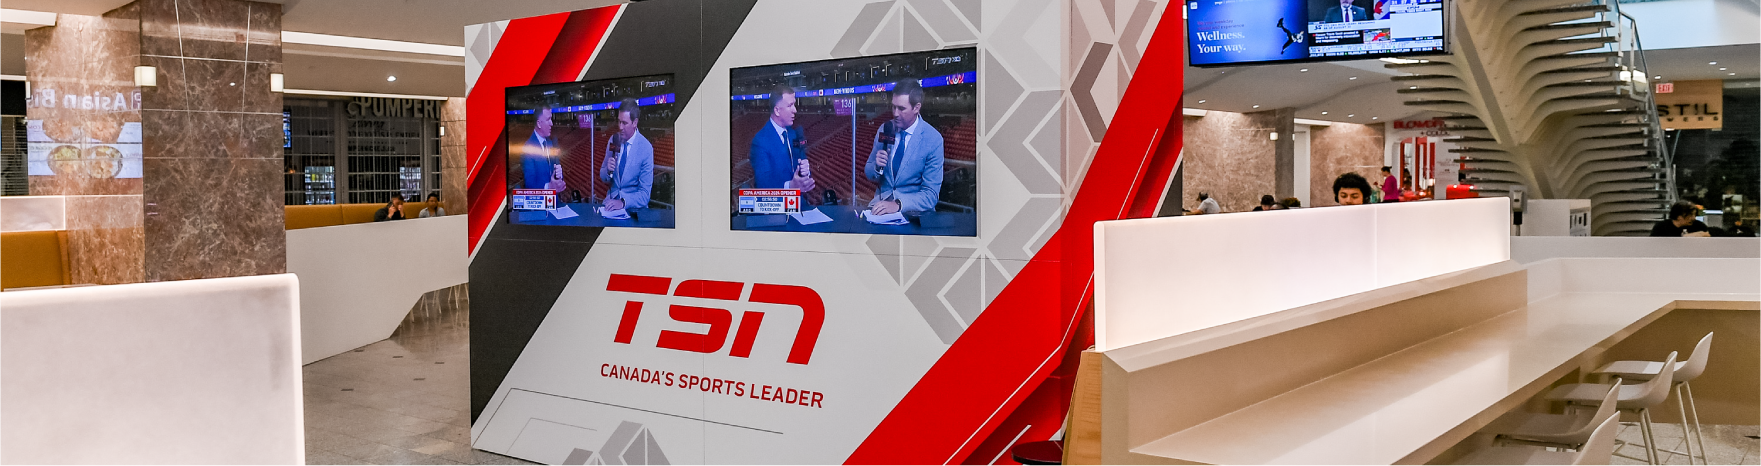 A sleek and contemporary sports media space within an indoor setting, featuring a large, angular media wall branded with 'TSN - Canada's Sports Leader.' The wall displays multiple screens showing sports analysts in discussion, enhancing the dynamic atmosphere.